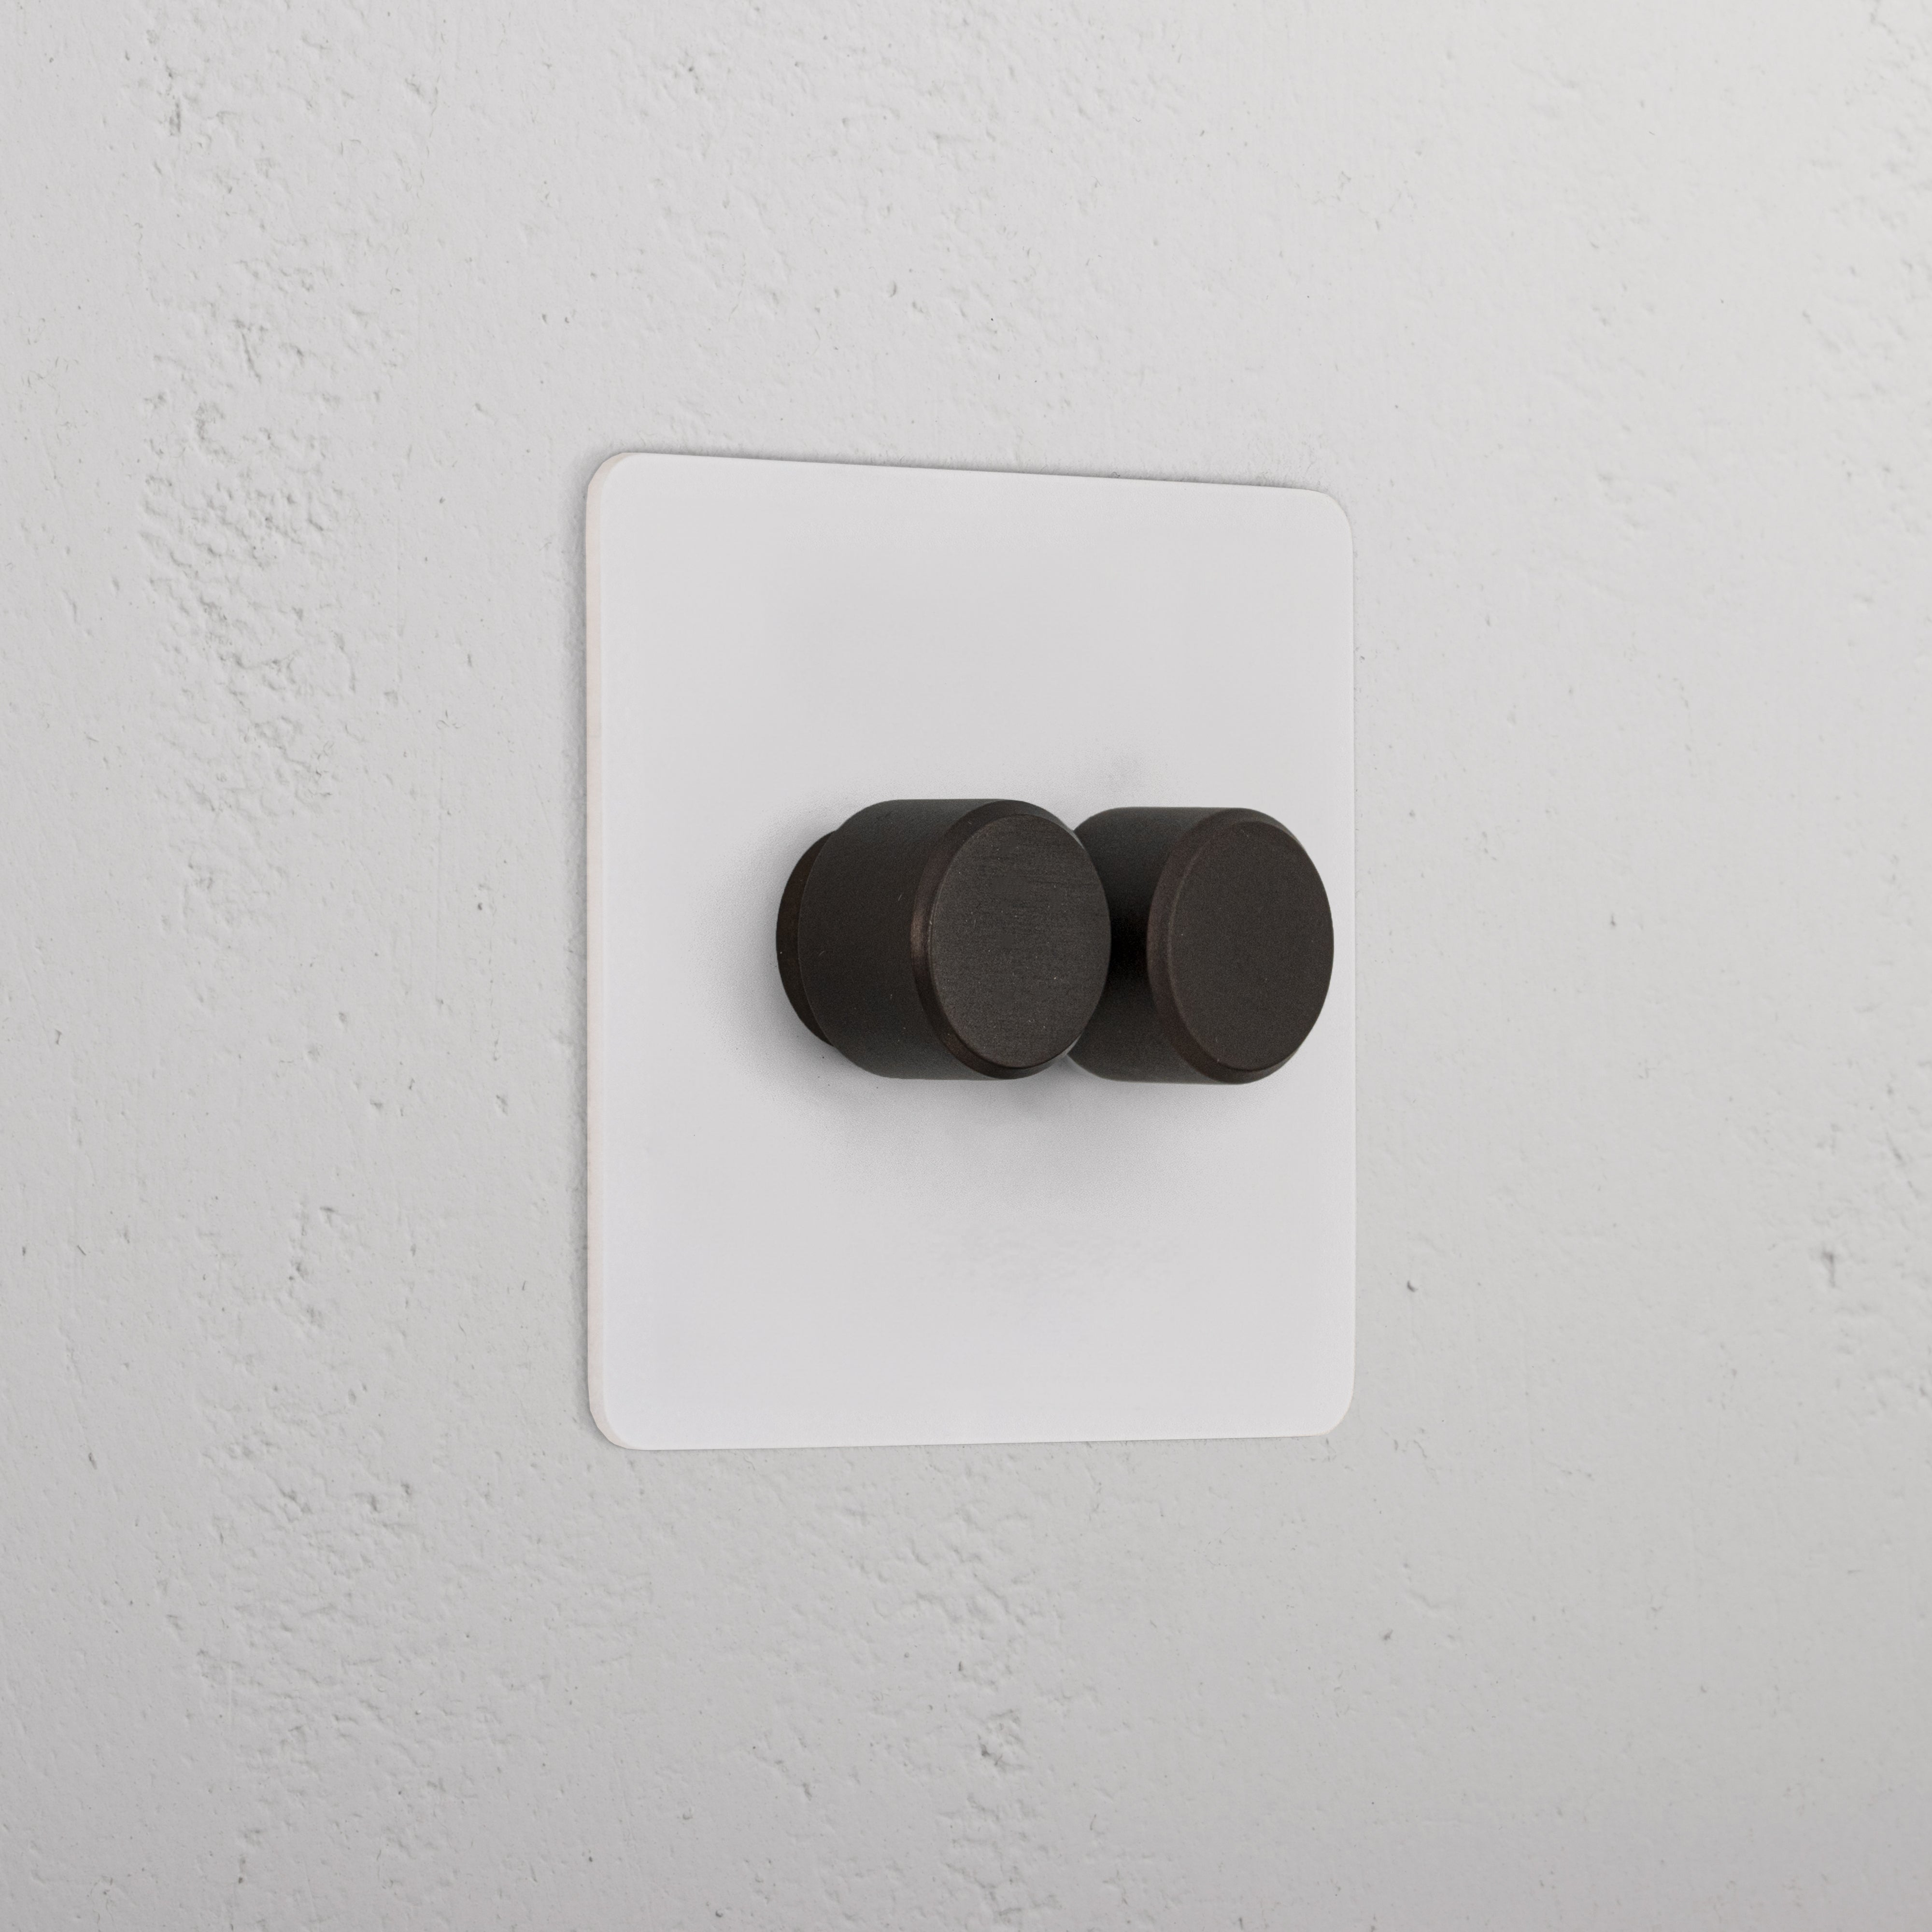 2G Dimmer Switch _ Paintable Bronze